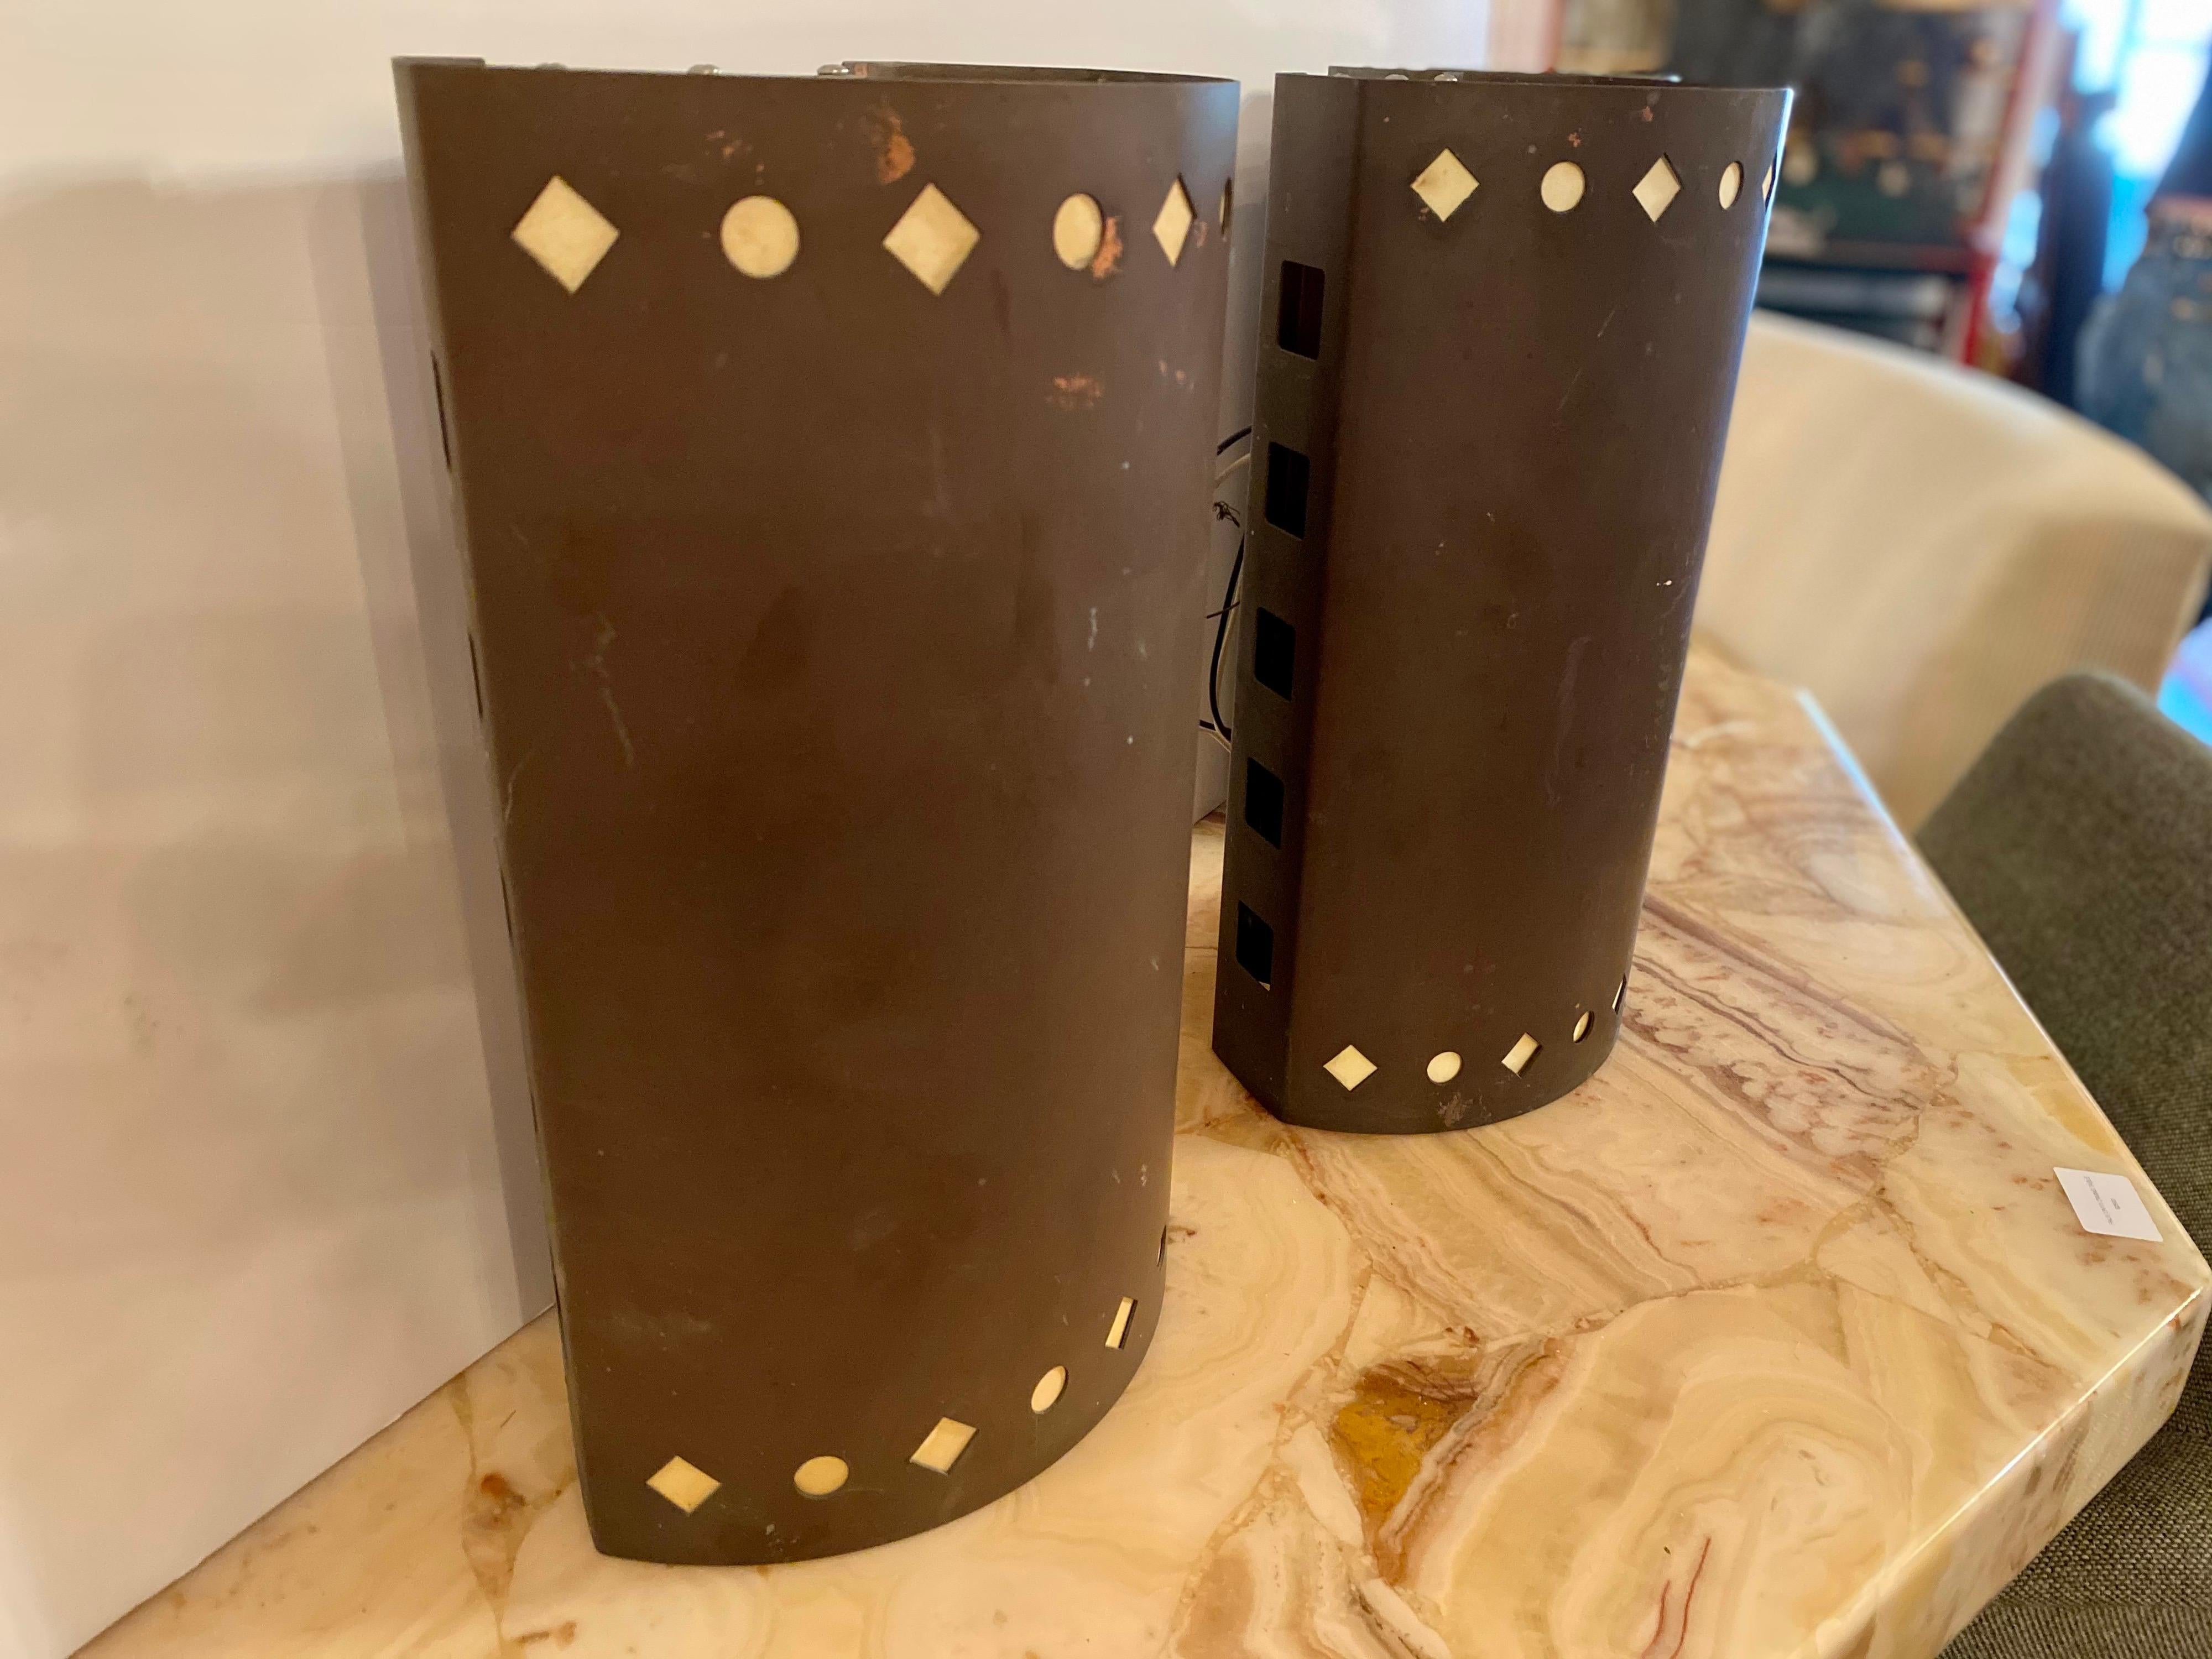 Set of three Ron Rezek copper outdoor wall sconces each pierced with geometric accents around the top and bottom of sconces. The back of each wall sconce is fabricated to attach to a wall. These vintage outdoor wall sconces are in great condition.